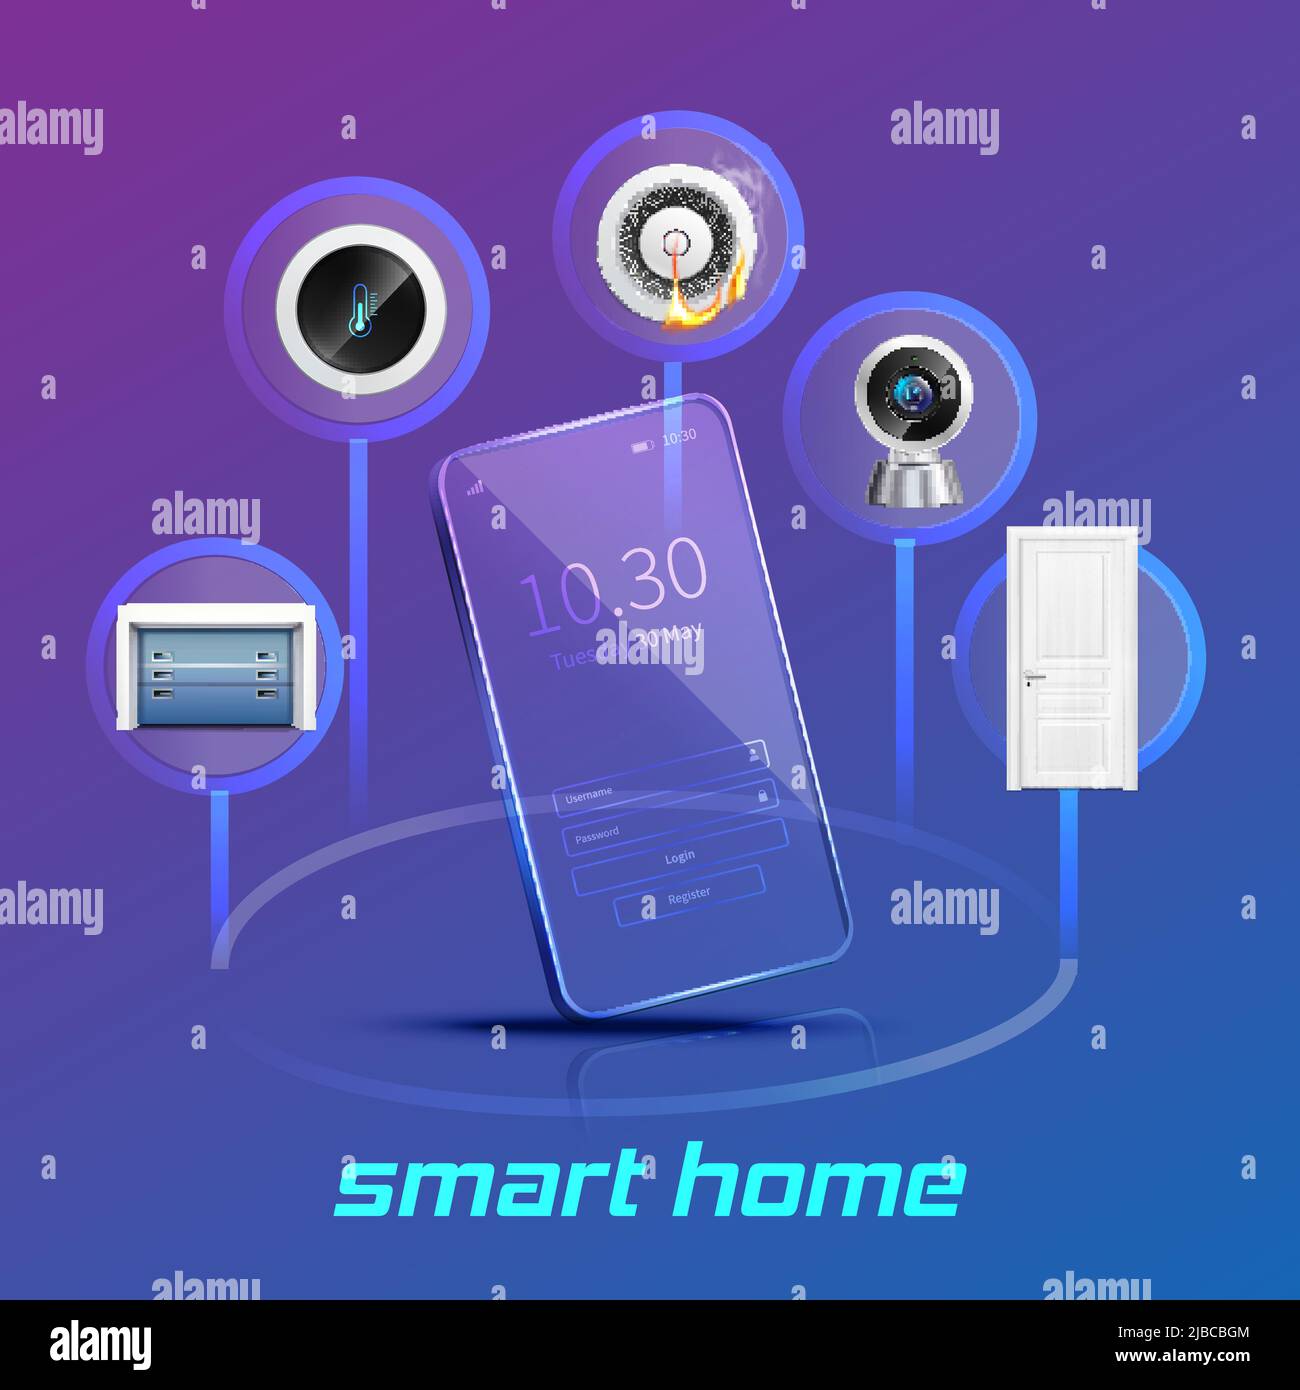 Smart home devices control and monitoring system using smartphone realistic composition violet blue gradient background vector illustration Stock Vector